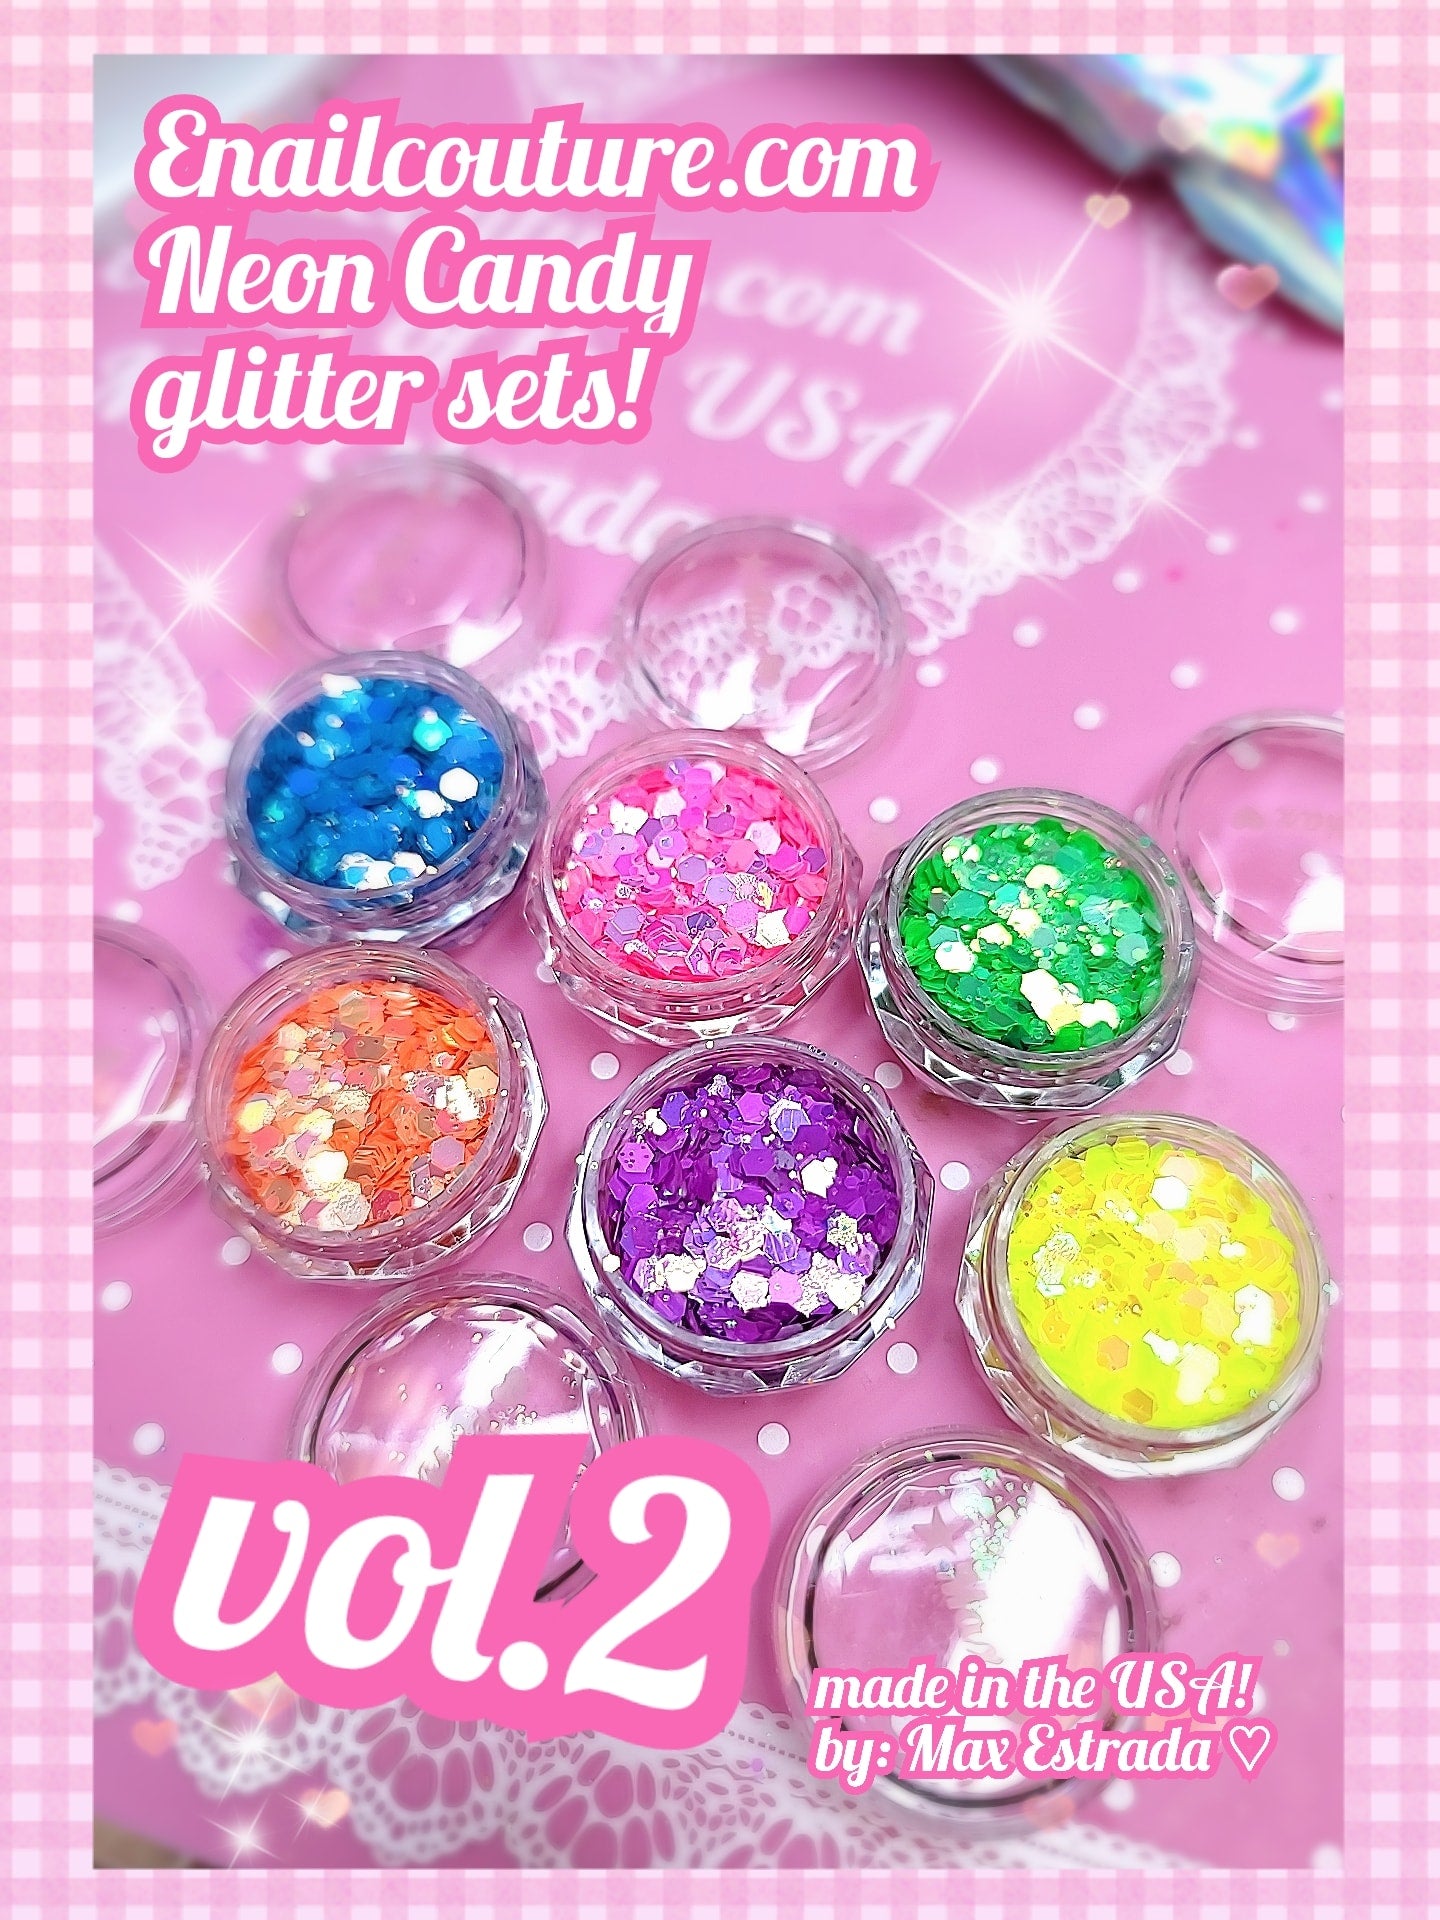 Neon Candy vol.2  Glitter Set (Set of 6 Holographic Nail Glitter Mermaid Powder Flakes Shiny Charms Hexagon Nail Art Pigment Dust Decoration Manicure)